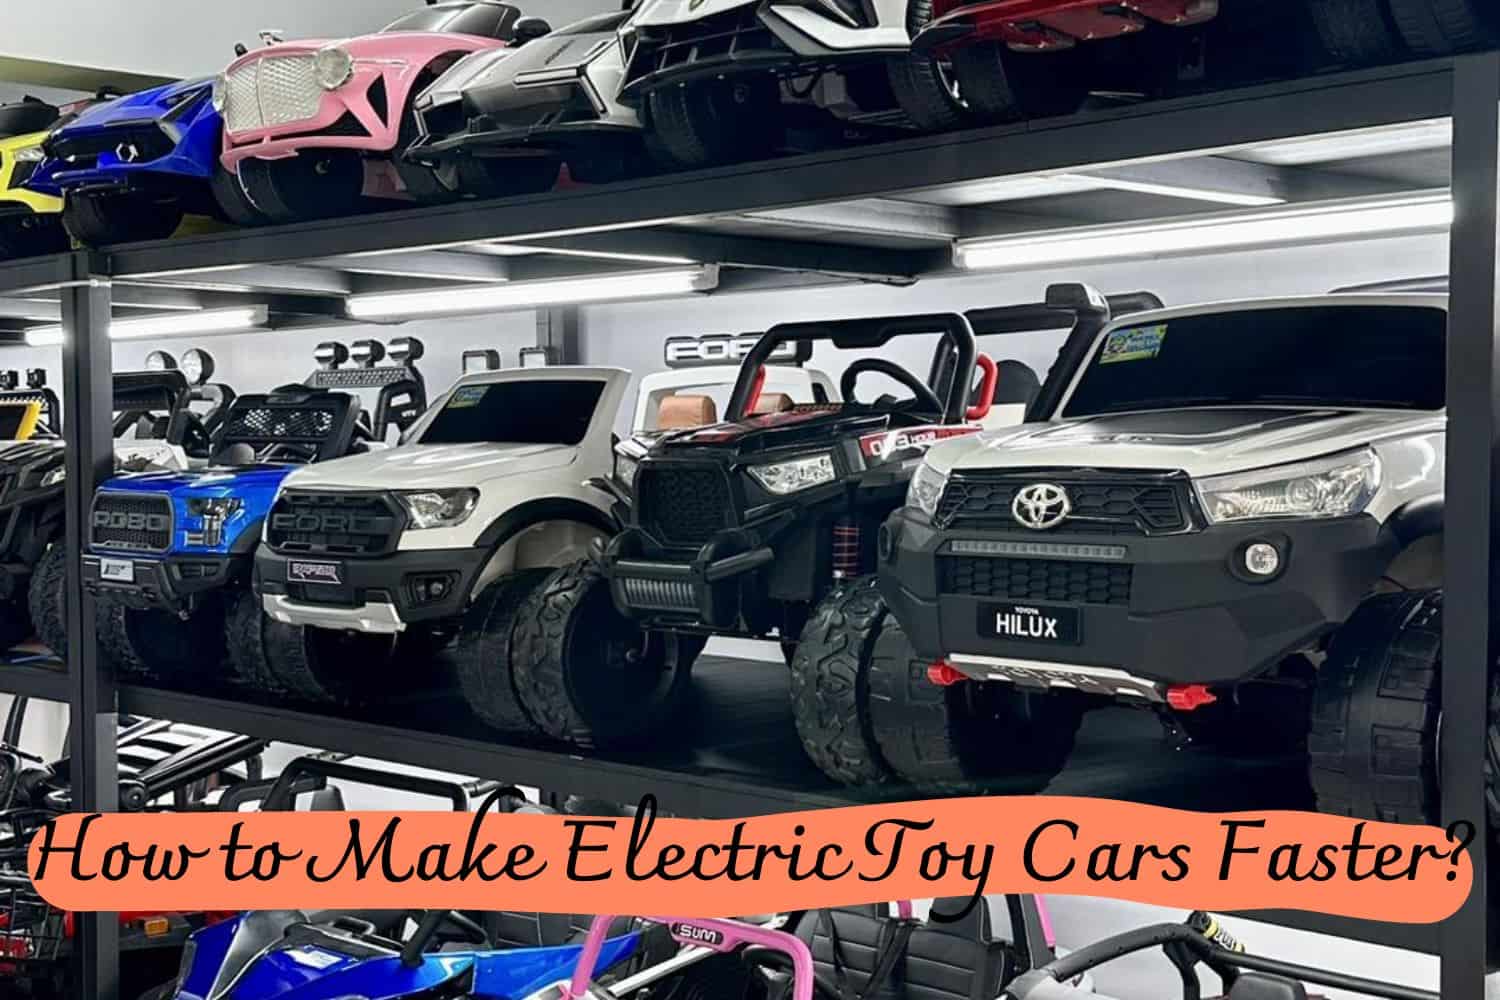 How to Make Electric Toy Cars Faster